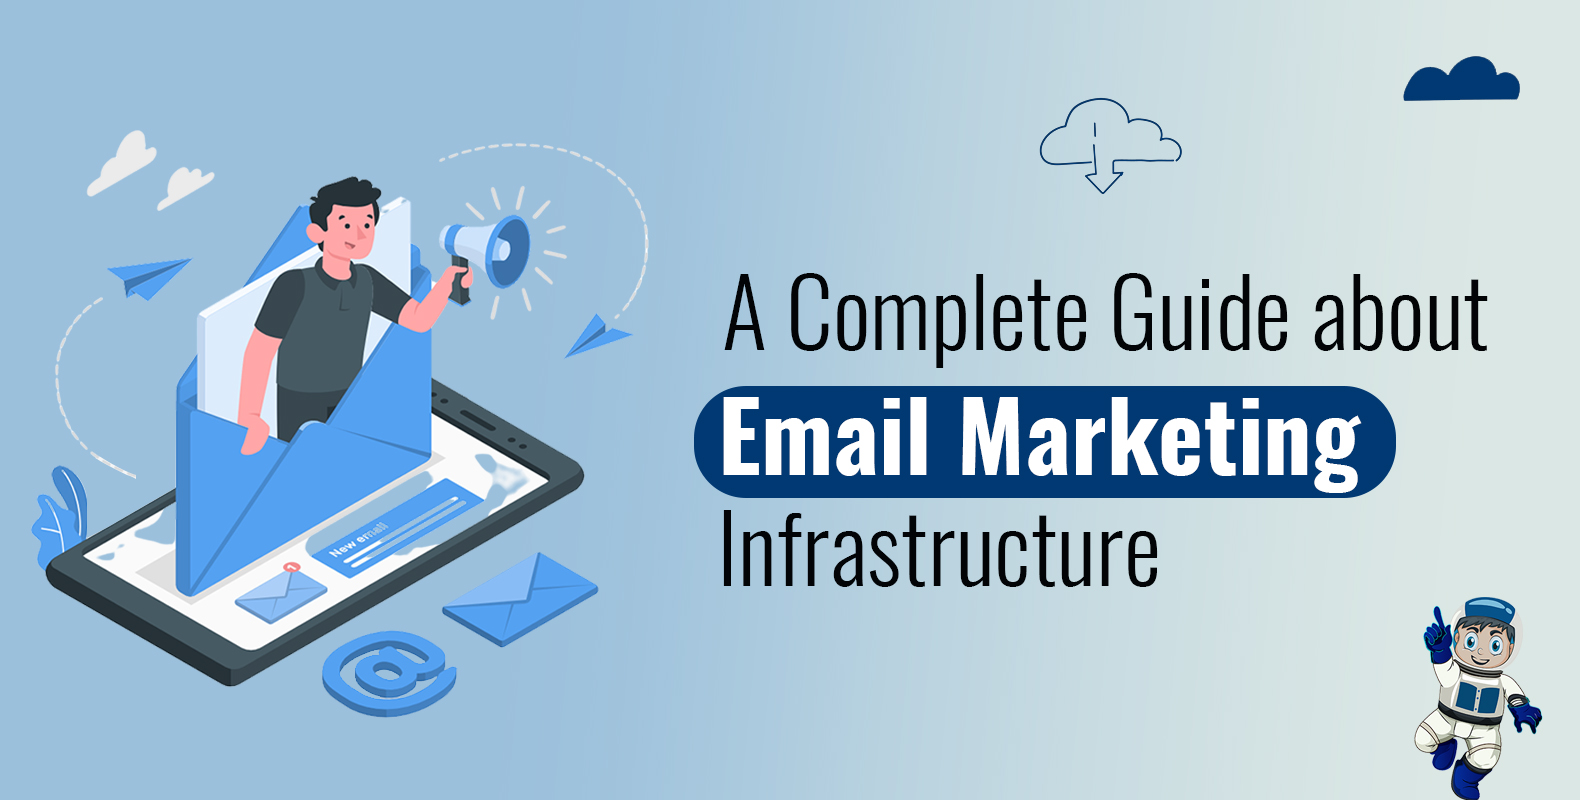 Email Marketing Infrastructure